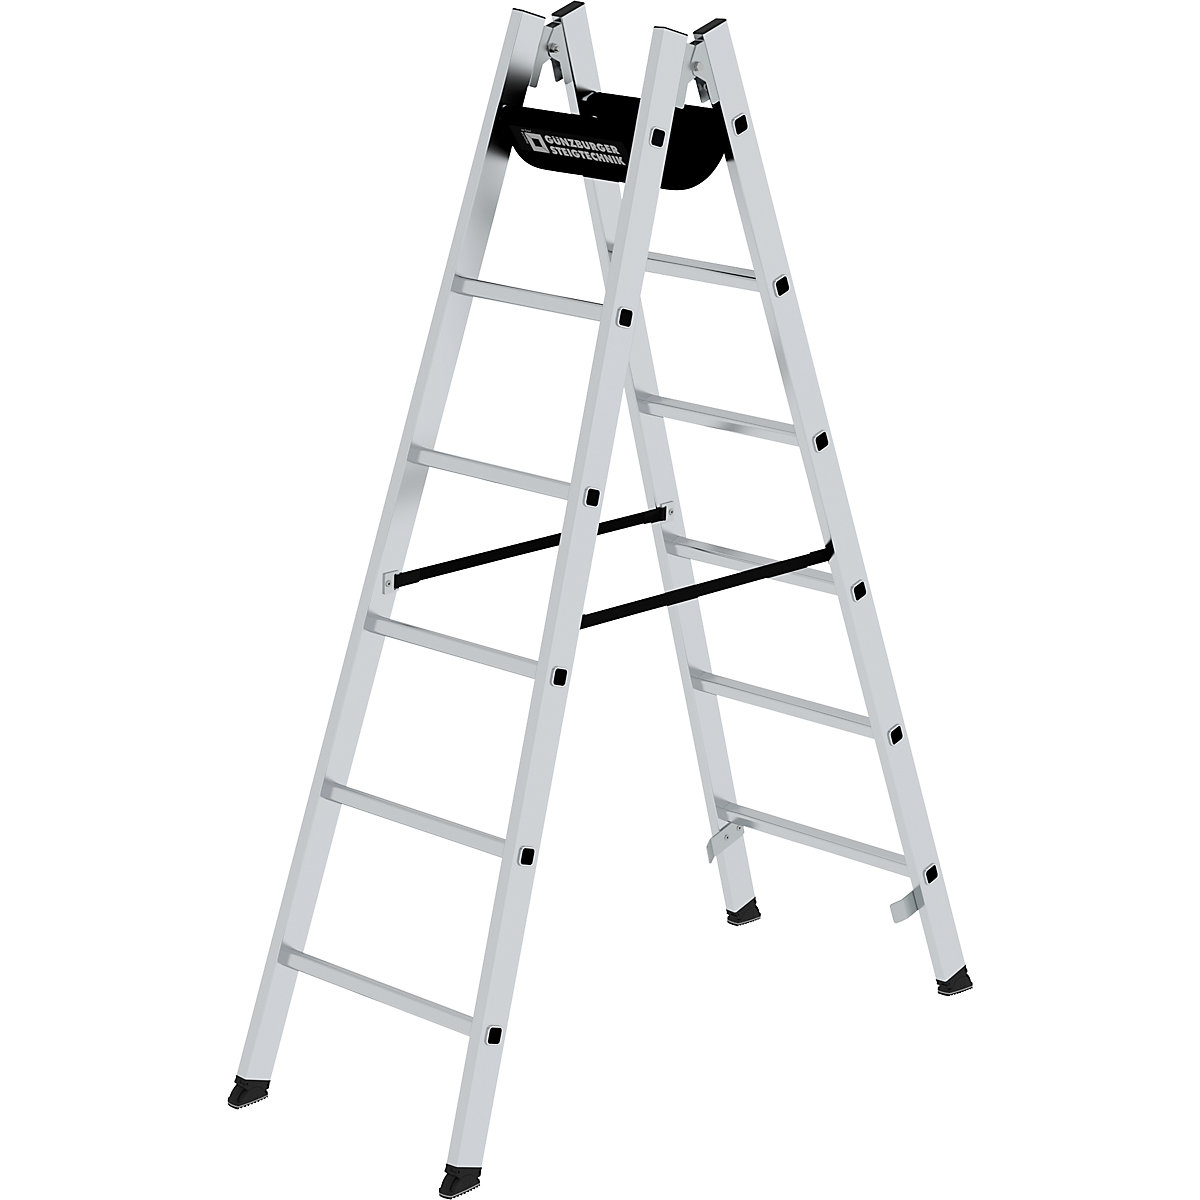 Safety rung ladder, double sided access - MUNK